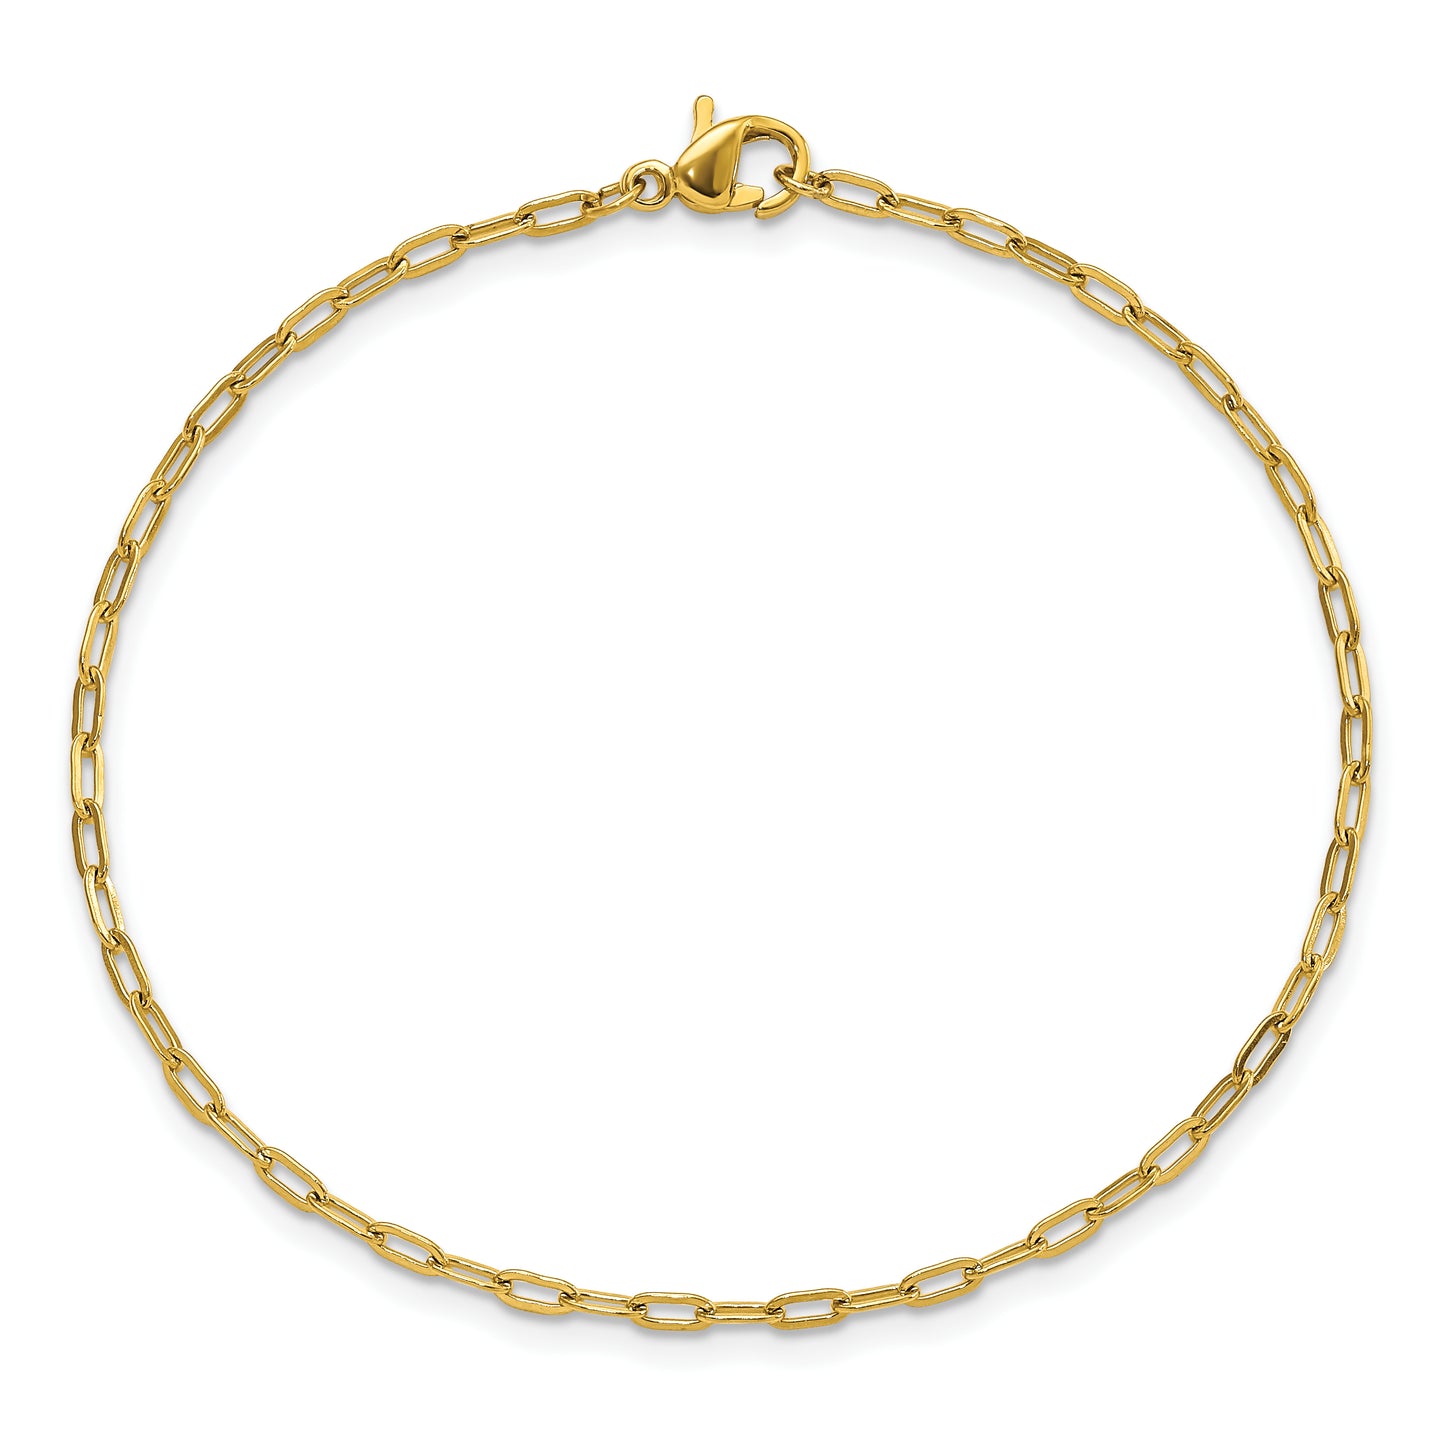 Chisel Stainless Steel Polished Yellow IP-plated Enlongated Open Paperclip Link 7.25 inch Chain Bracelet